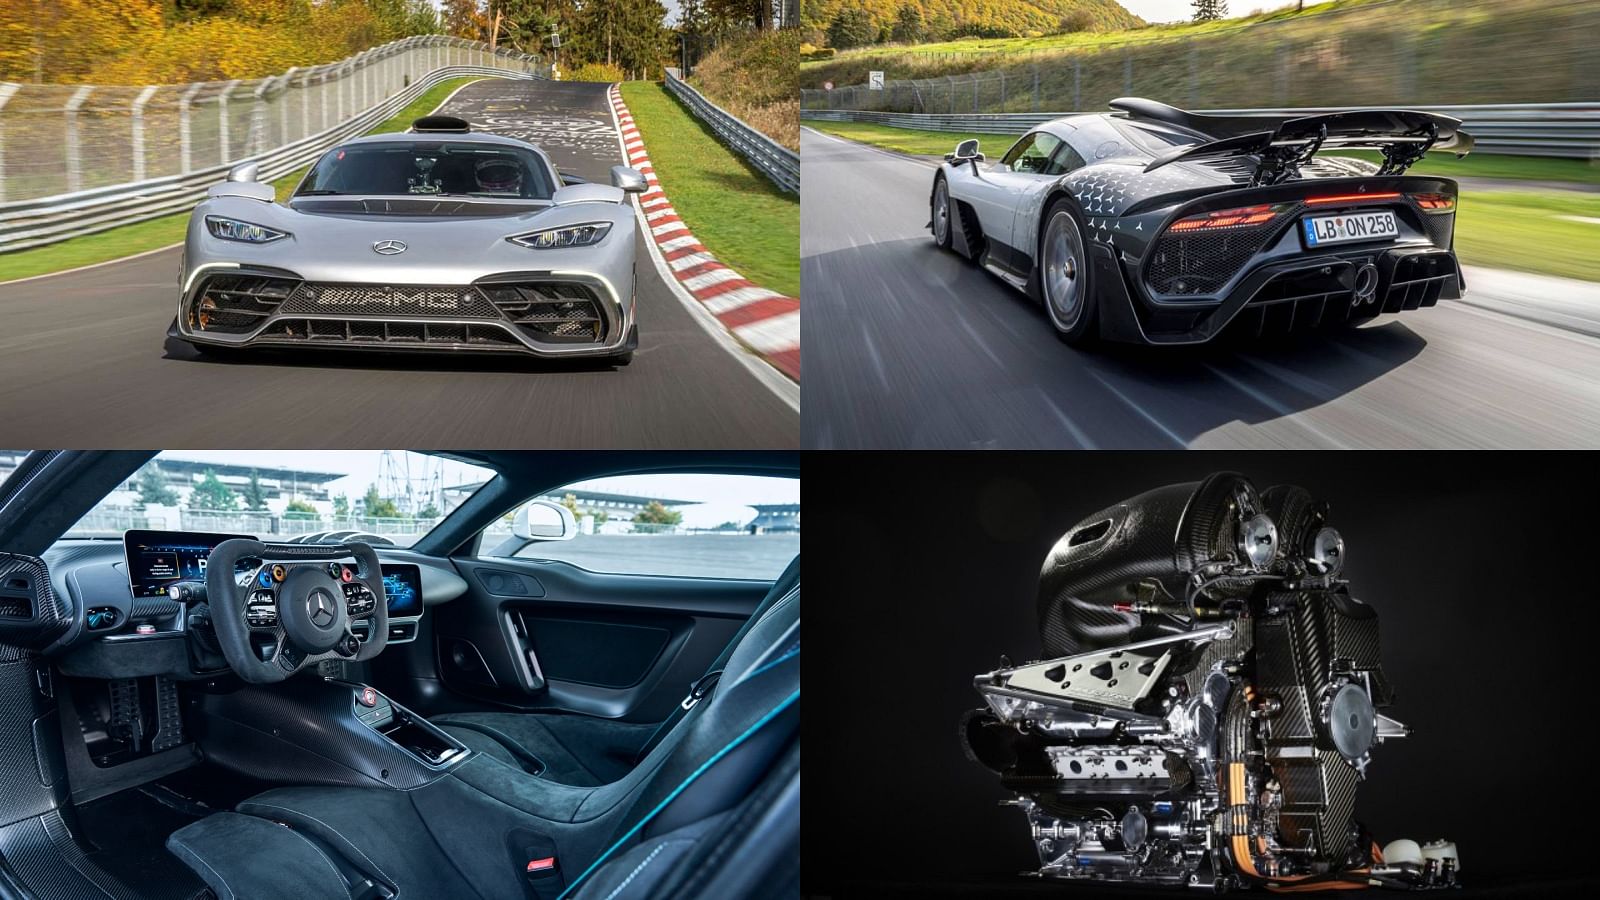 Mercedes-AMG One sets an unrealistic Nurburgring time